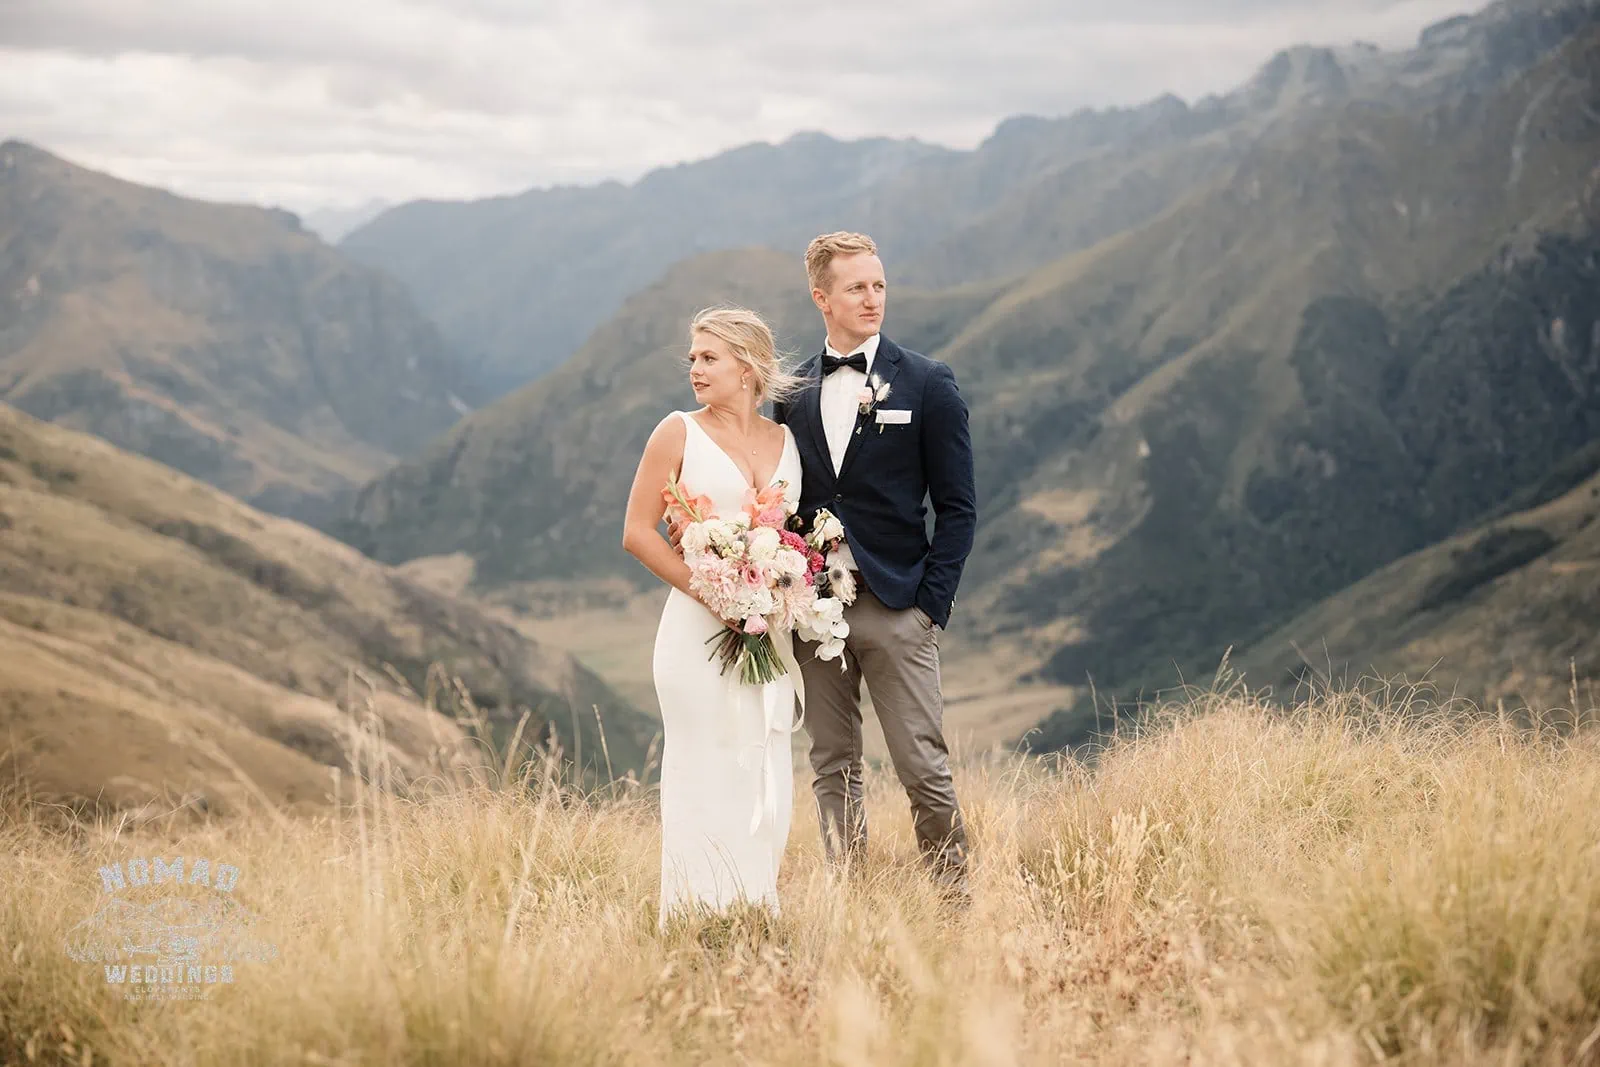 Shannon and Riaan eloping for their wedding on top of a hill in Queenstown, New Zealand.